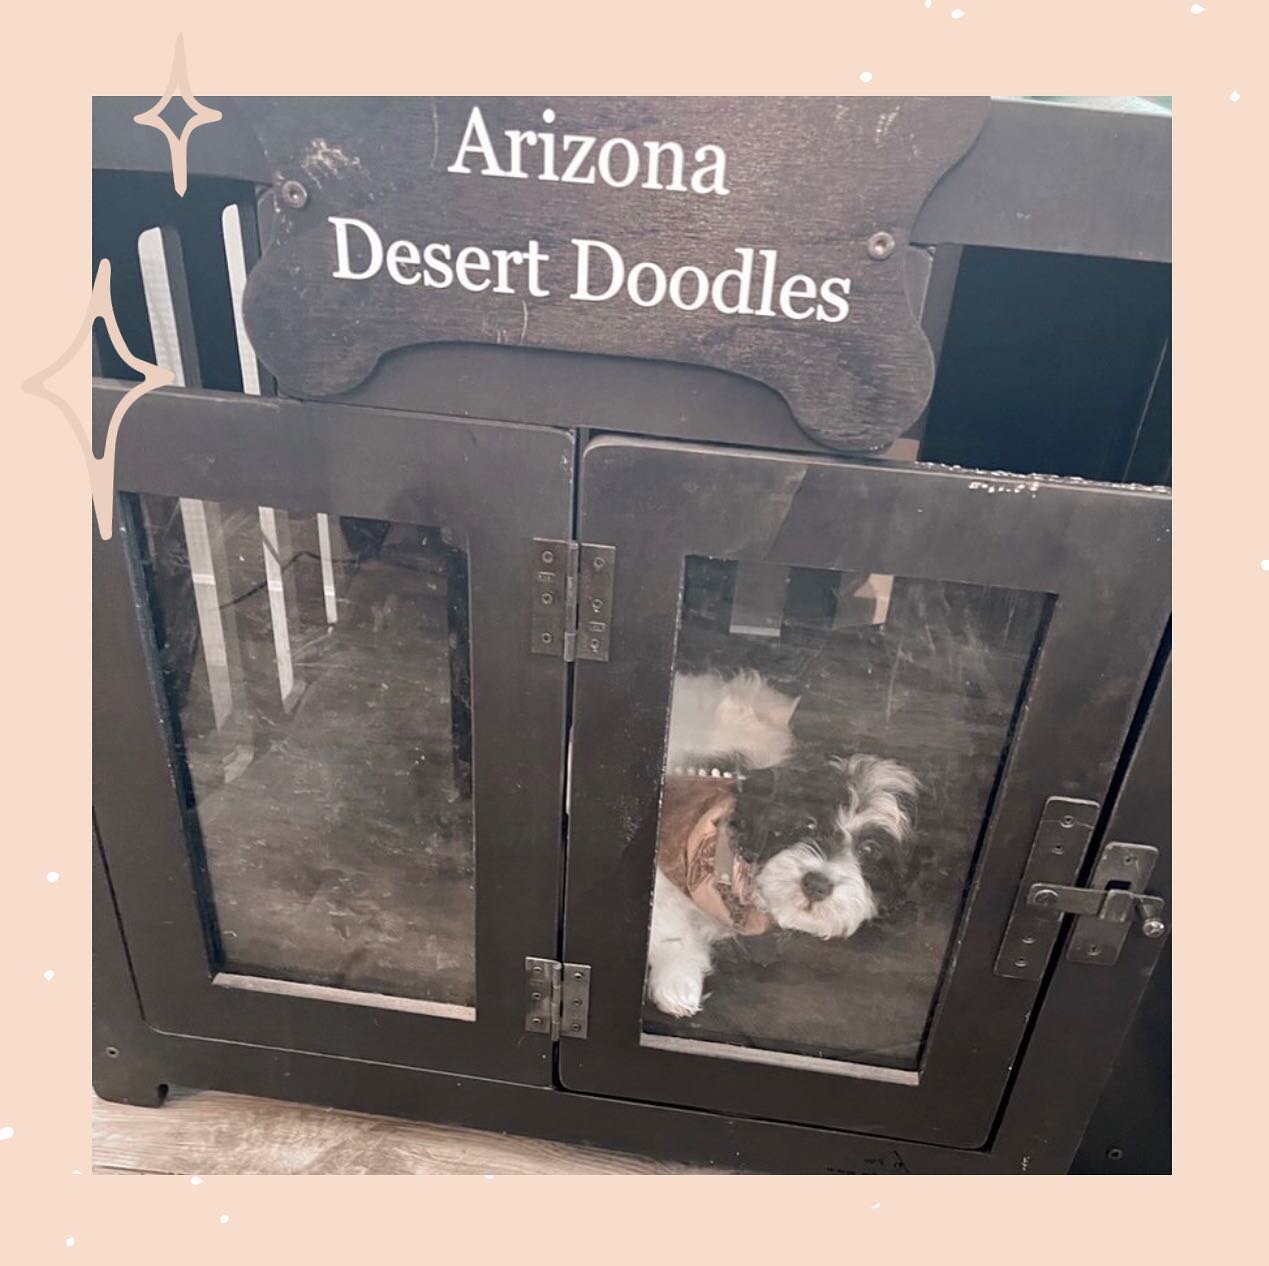 Bernedoodles started going home this weekend ✨ so excited to see them go off to their furever families! We still have 2 available! Message for details!
.
.
.

#bernedoodlesofinstagram  #doodlesofinstagram #doodlesofarizona #arizona #doodlebreeder #ar